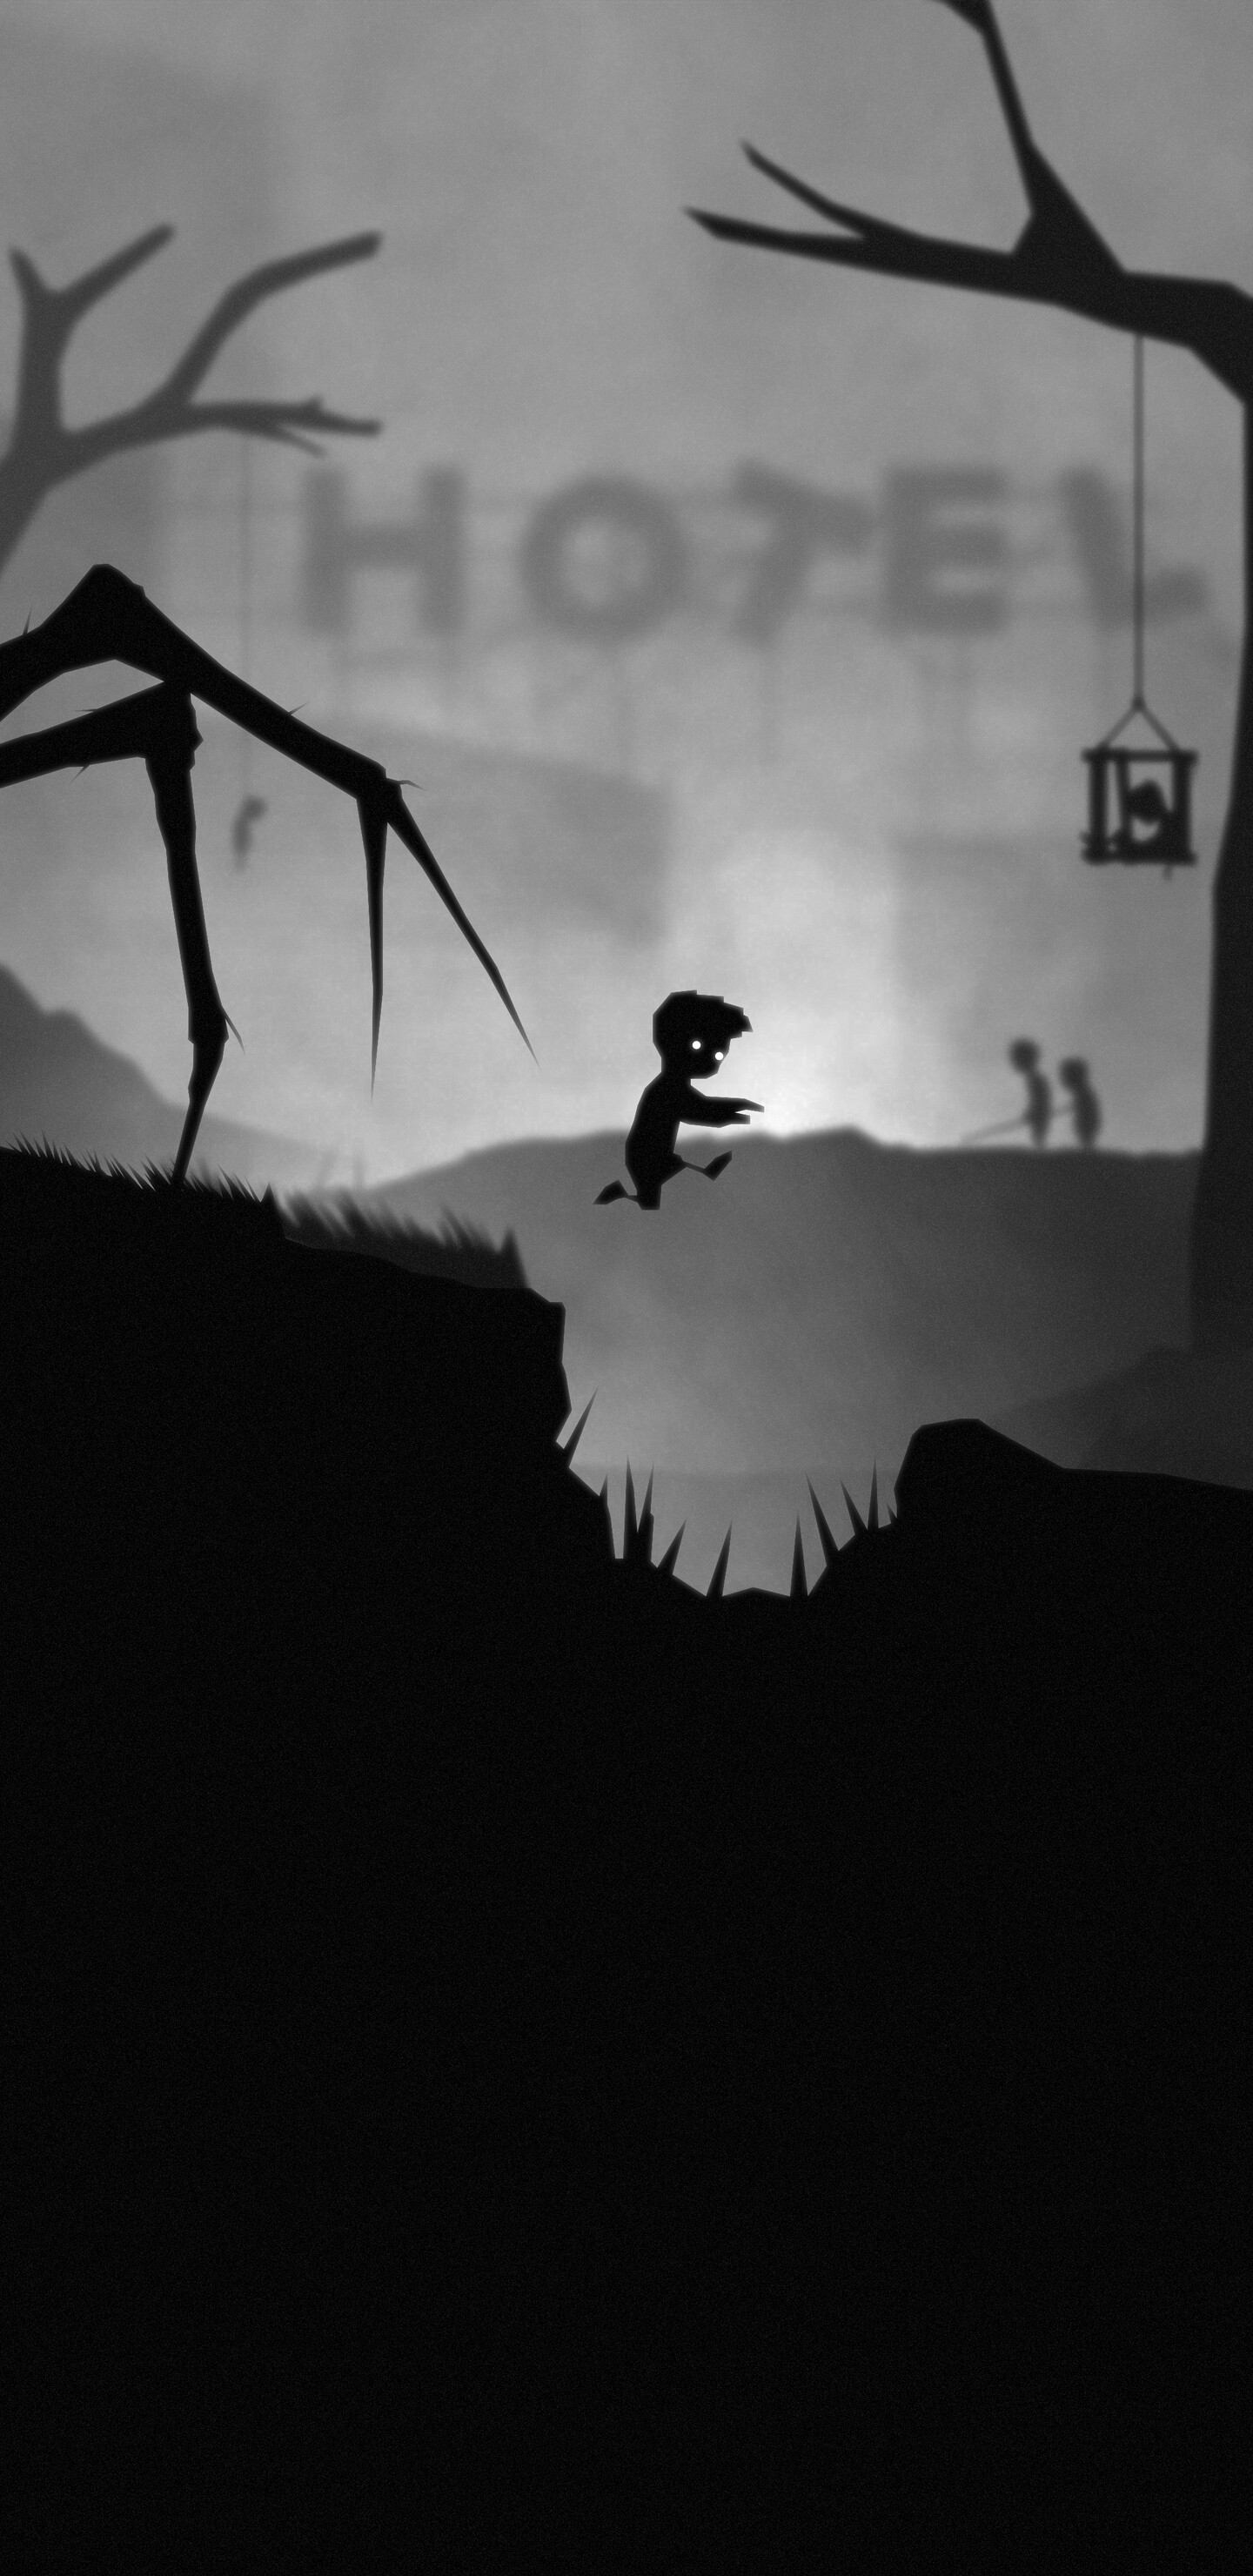 Limbo: The game is presented in black-and-white tones, using lighting, film grain effects, and minimal ambient sounds to create an eerie atmosphere often associated with the horror genre. 1440x2960 HD Background.